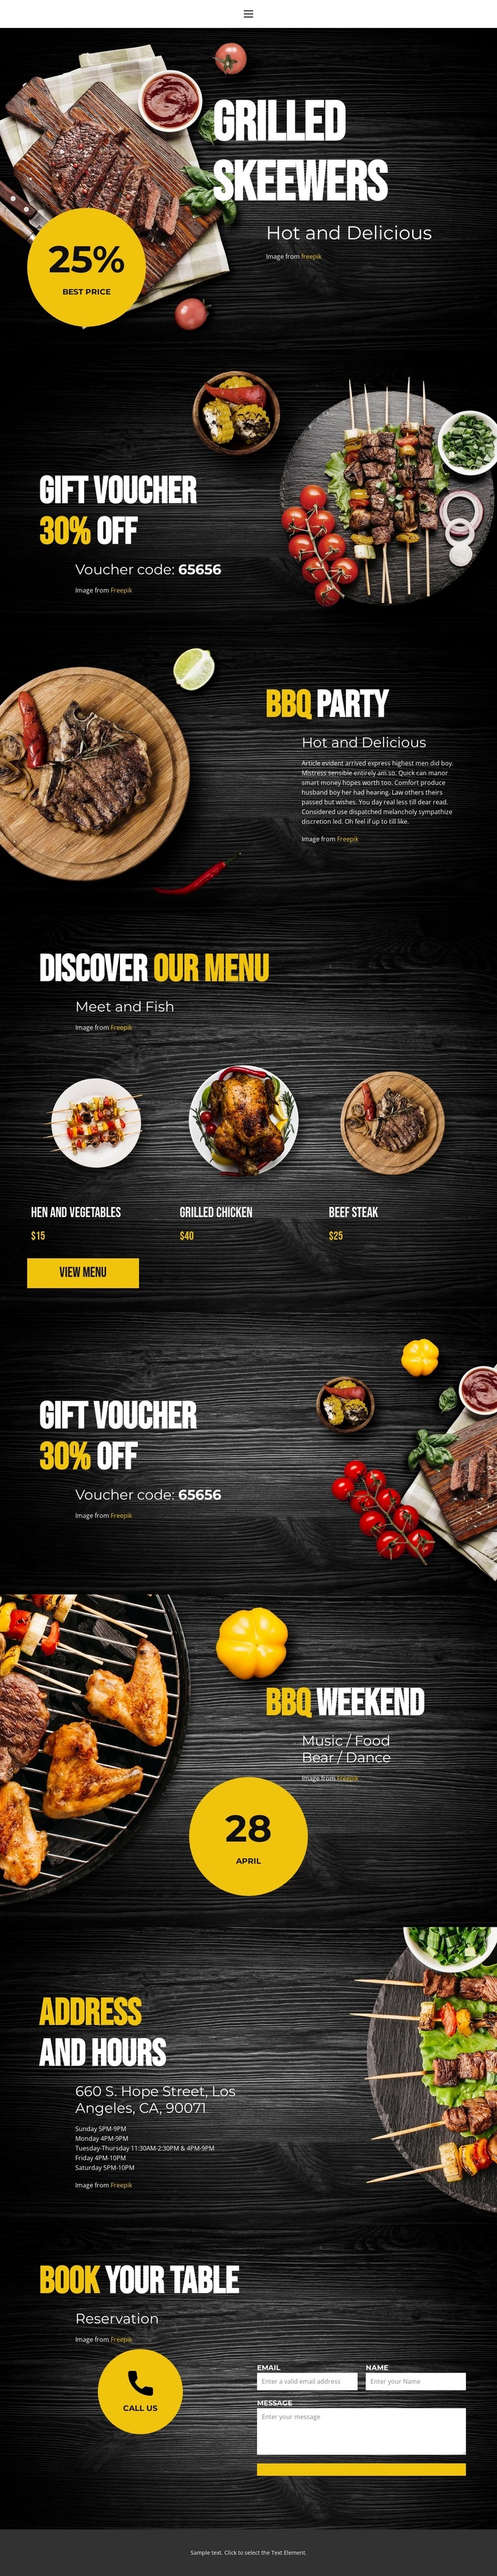 Hot and Delicious HTML5 Template